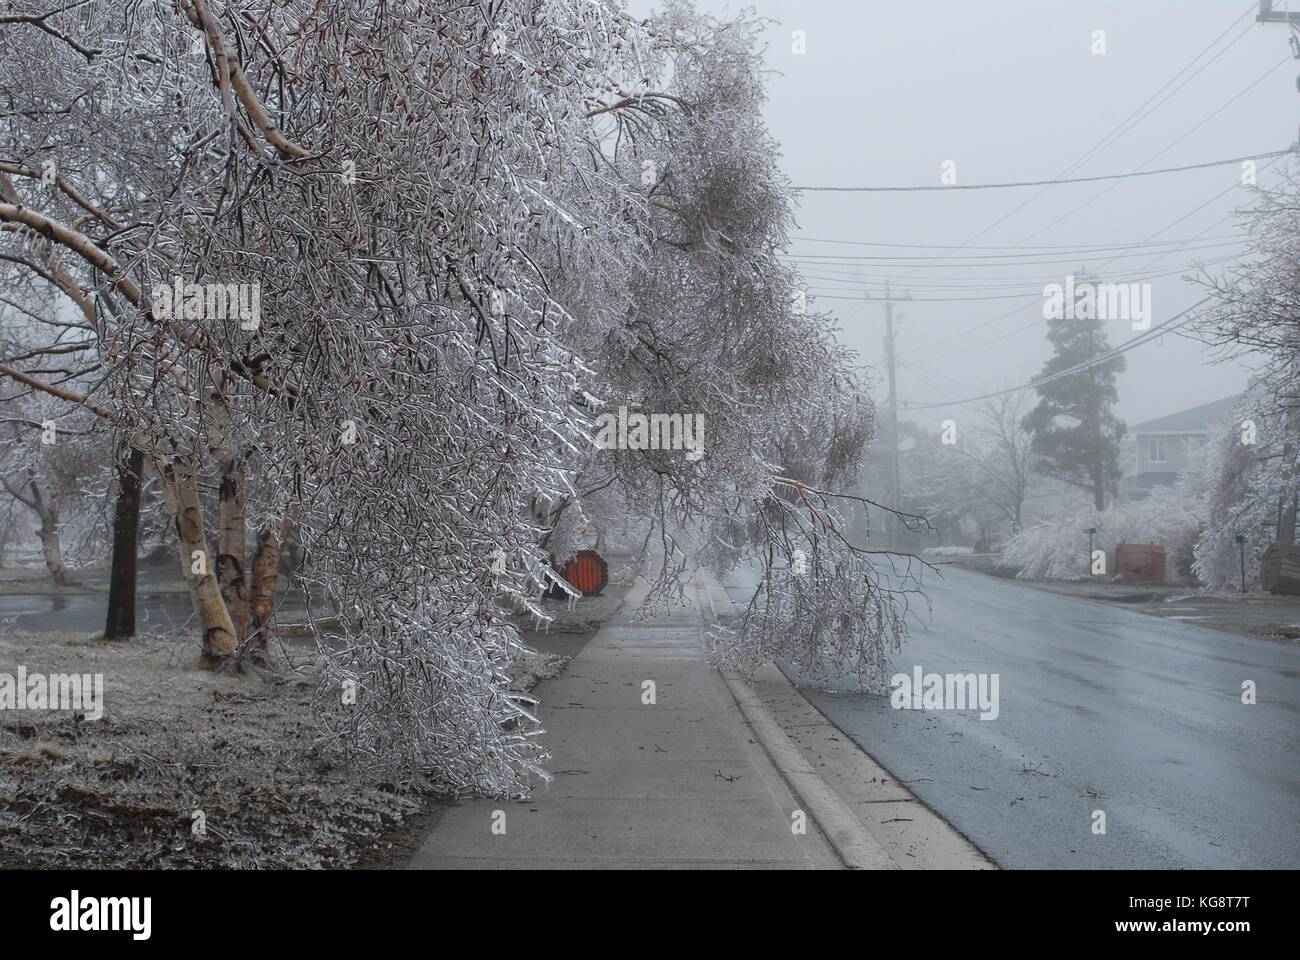 Thick ice on trees, during ice storm in Conception Bay South, Newfoundland Labrador, cause the branches to bend over sidewalks and streets. Stock Photo